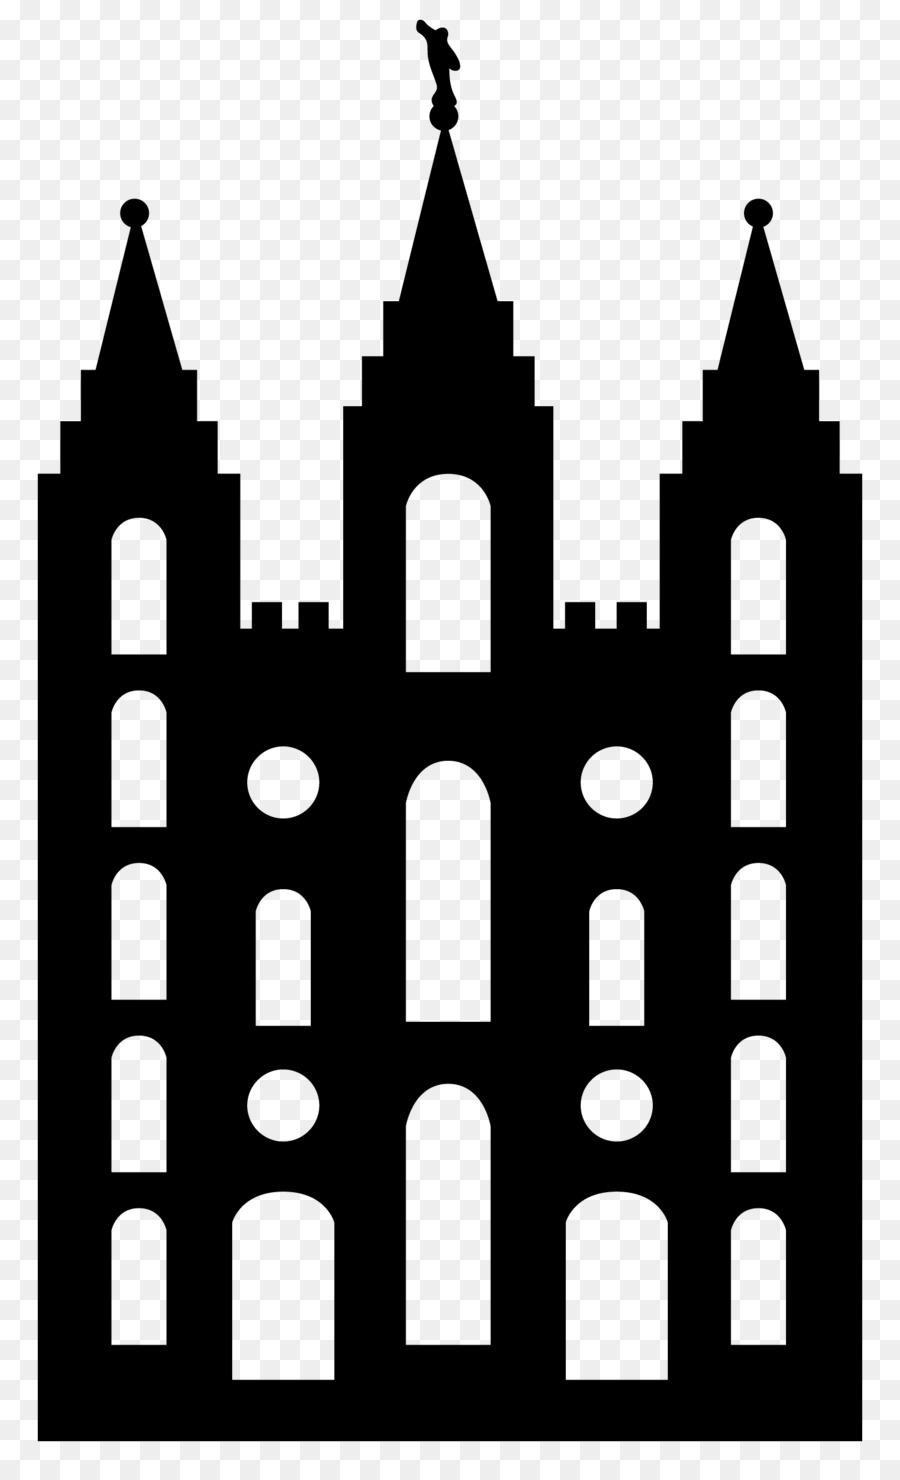 Free Lds Temple Silhouette, Download Free Lds Temple Silhouette png